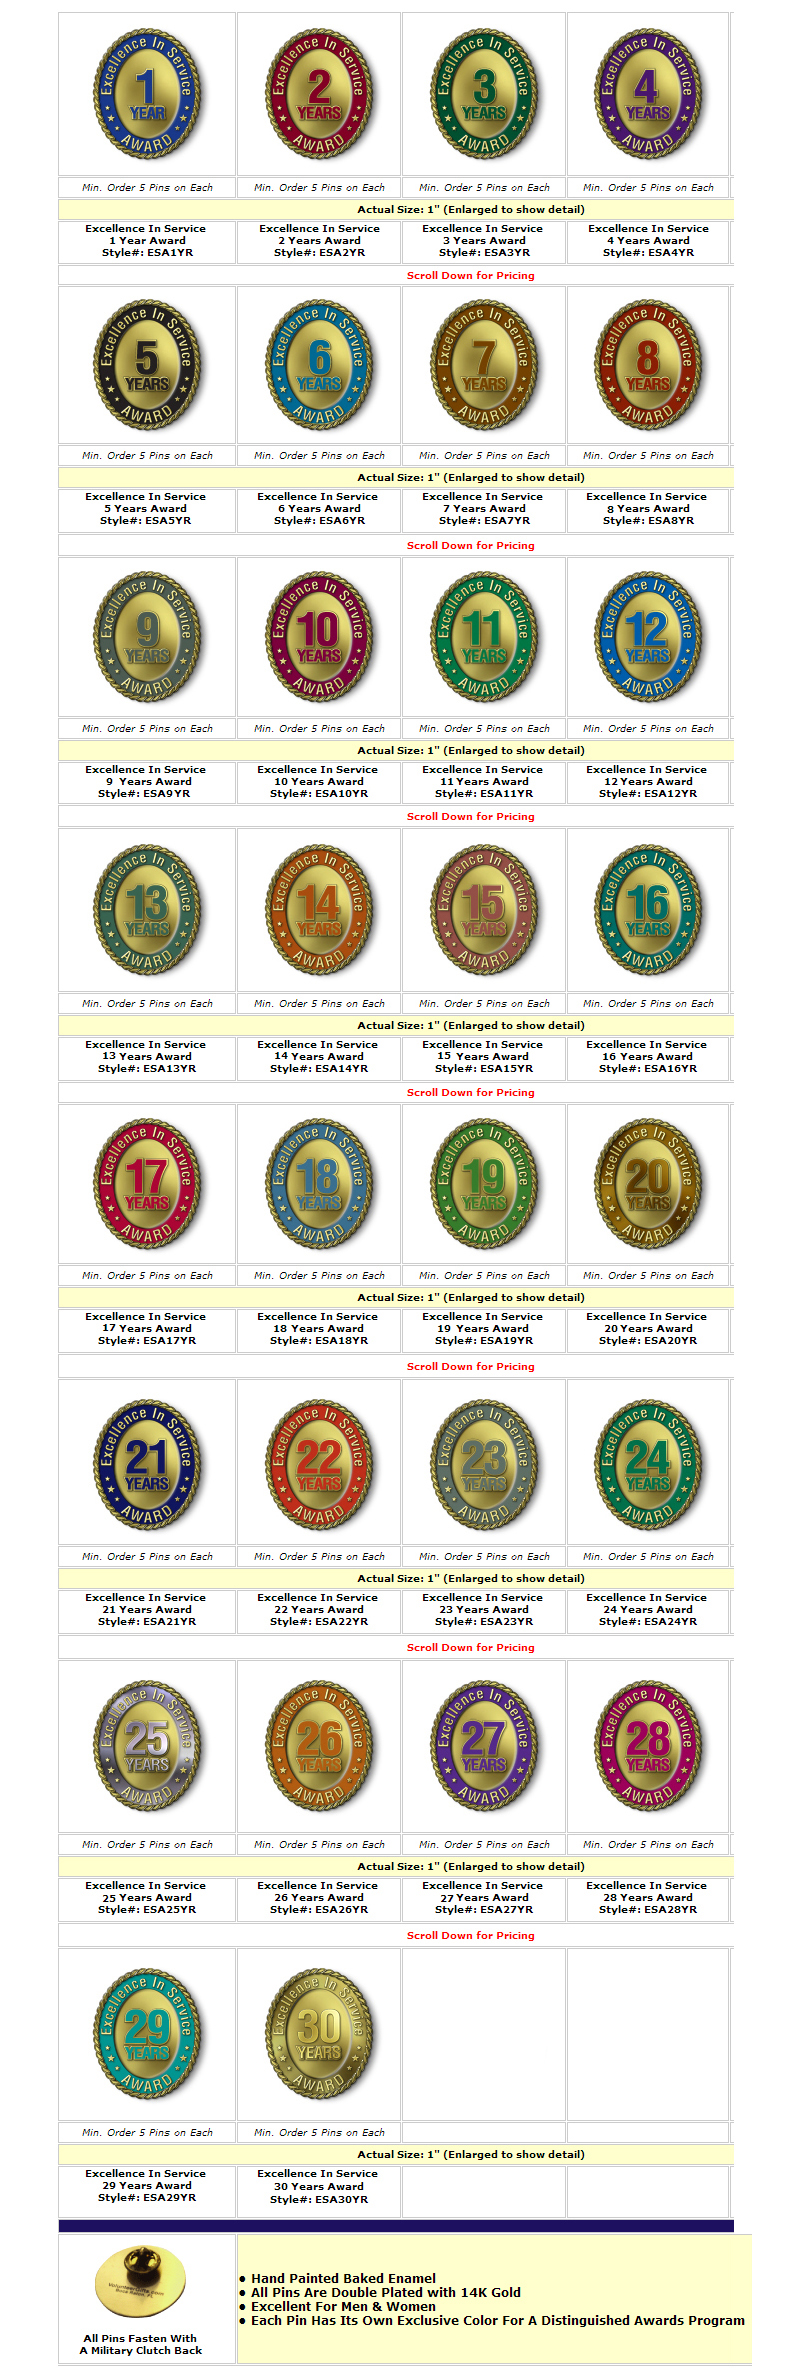 Custom Excellence in Service Pins 